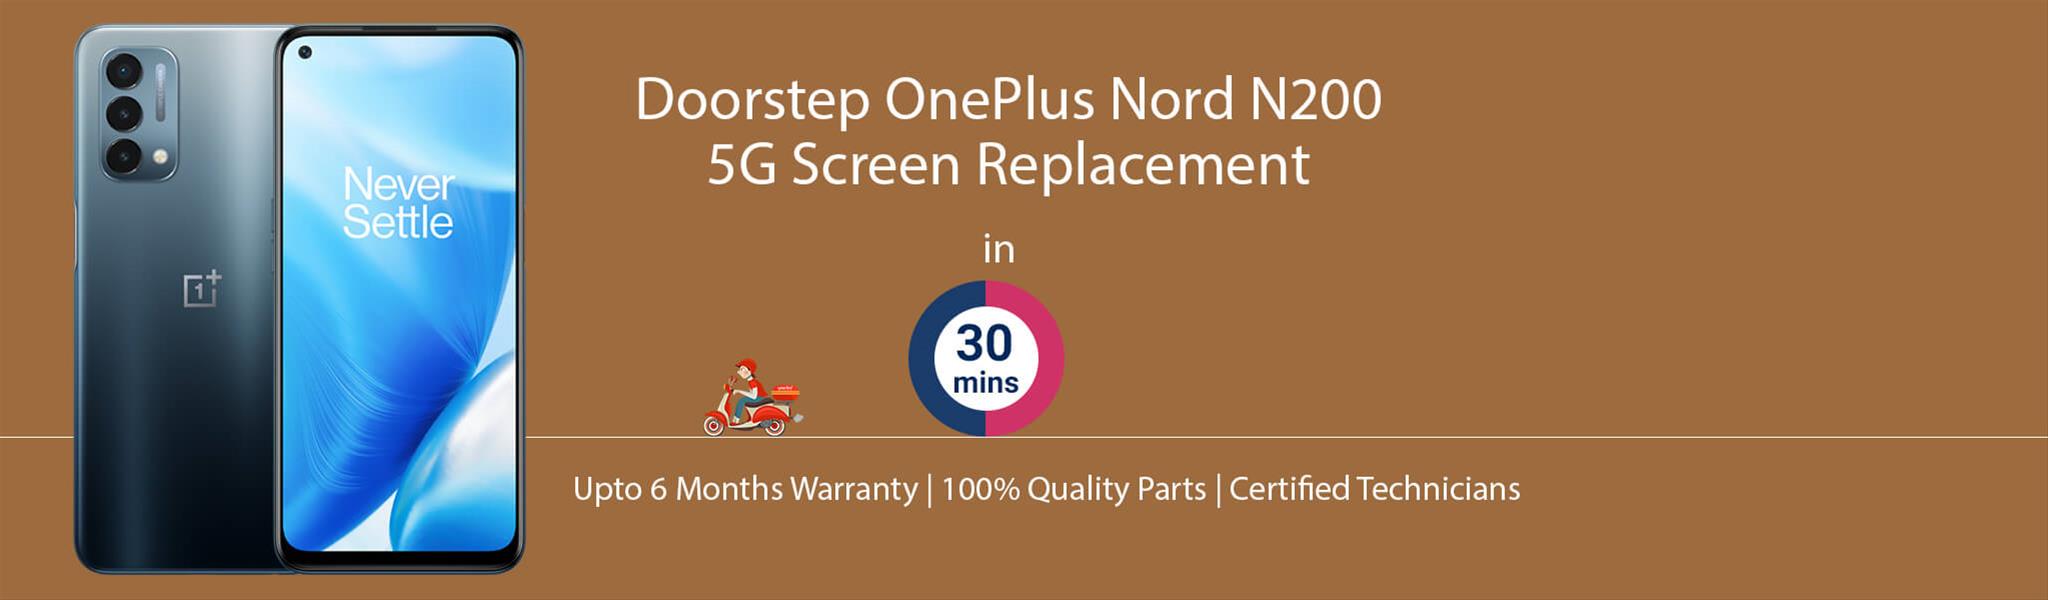 oneplus-nord-n200-5g-screen-replacement.jpg